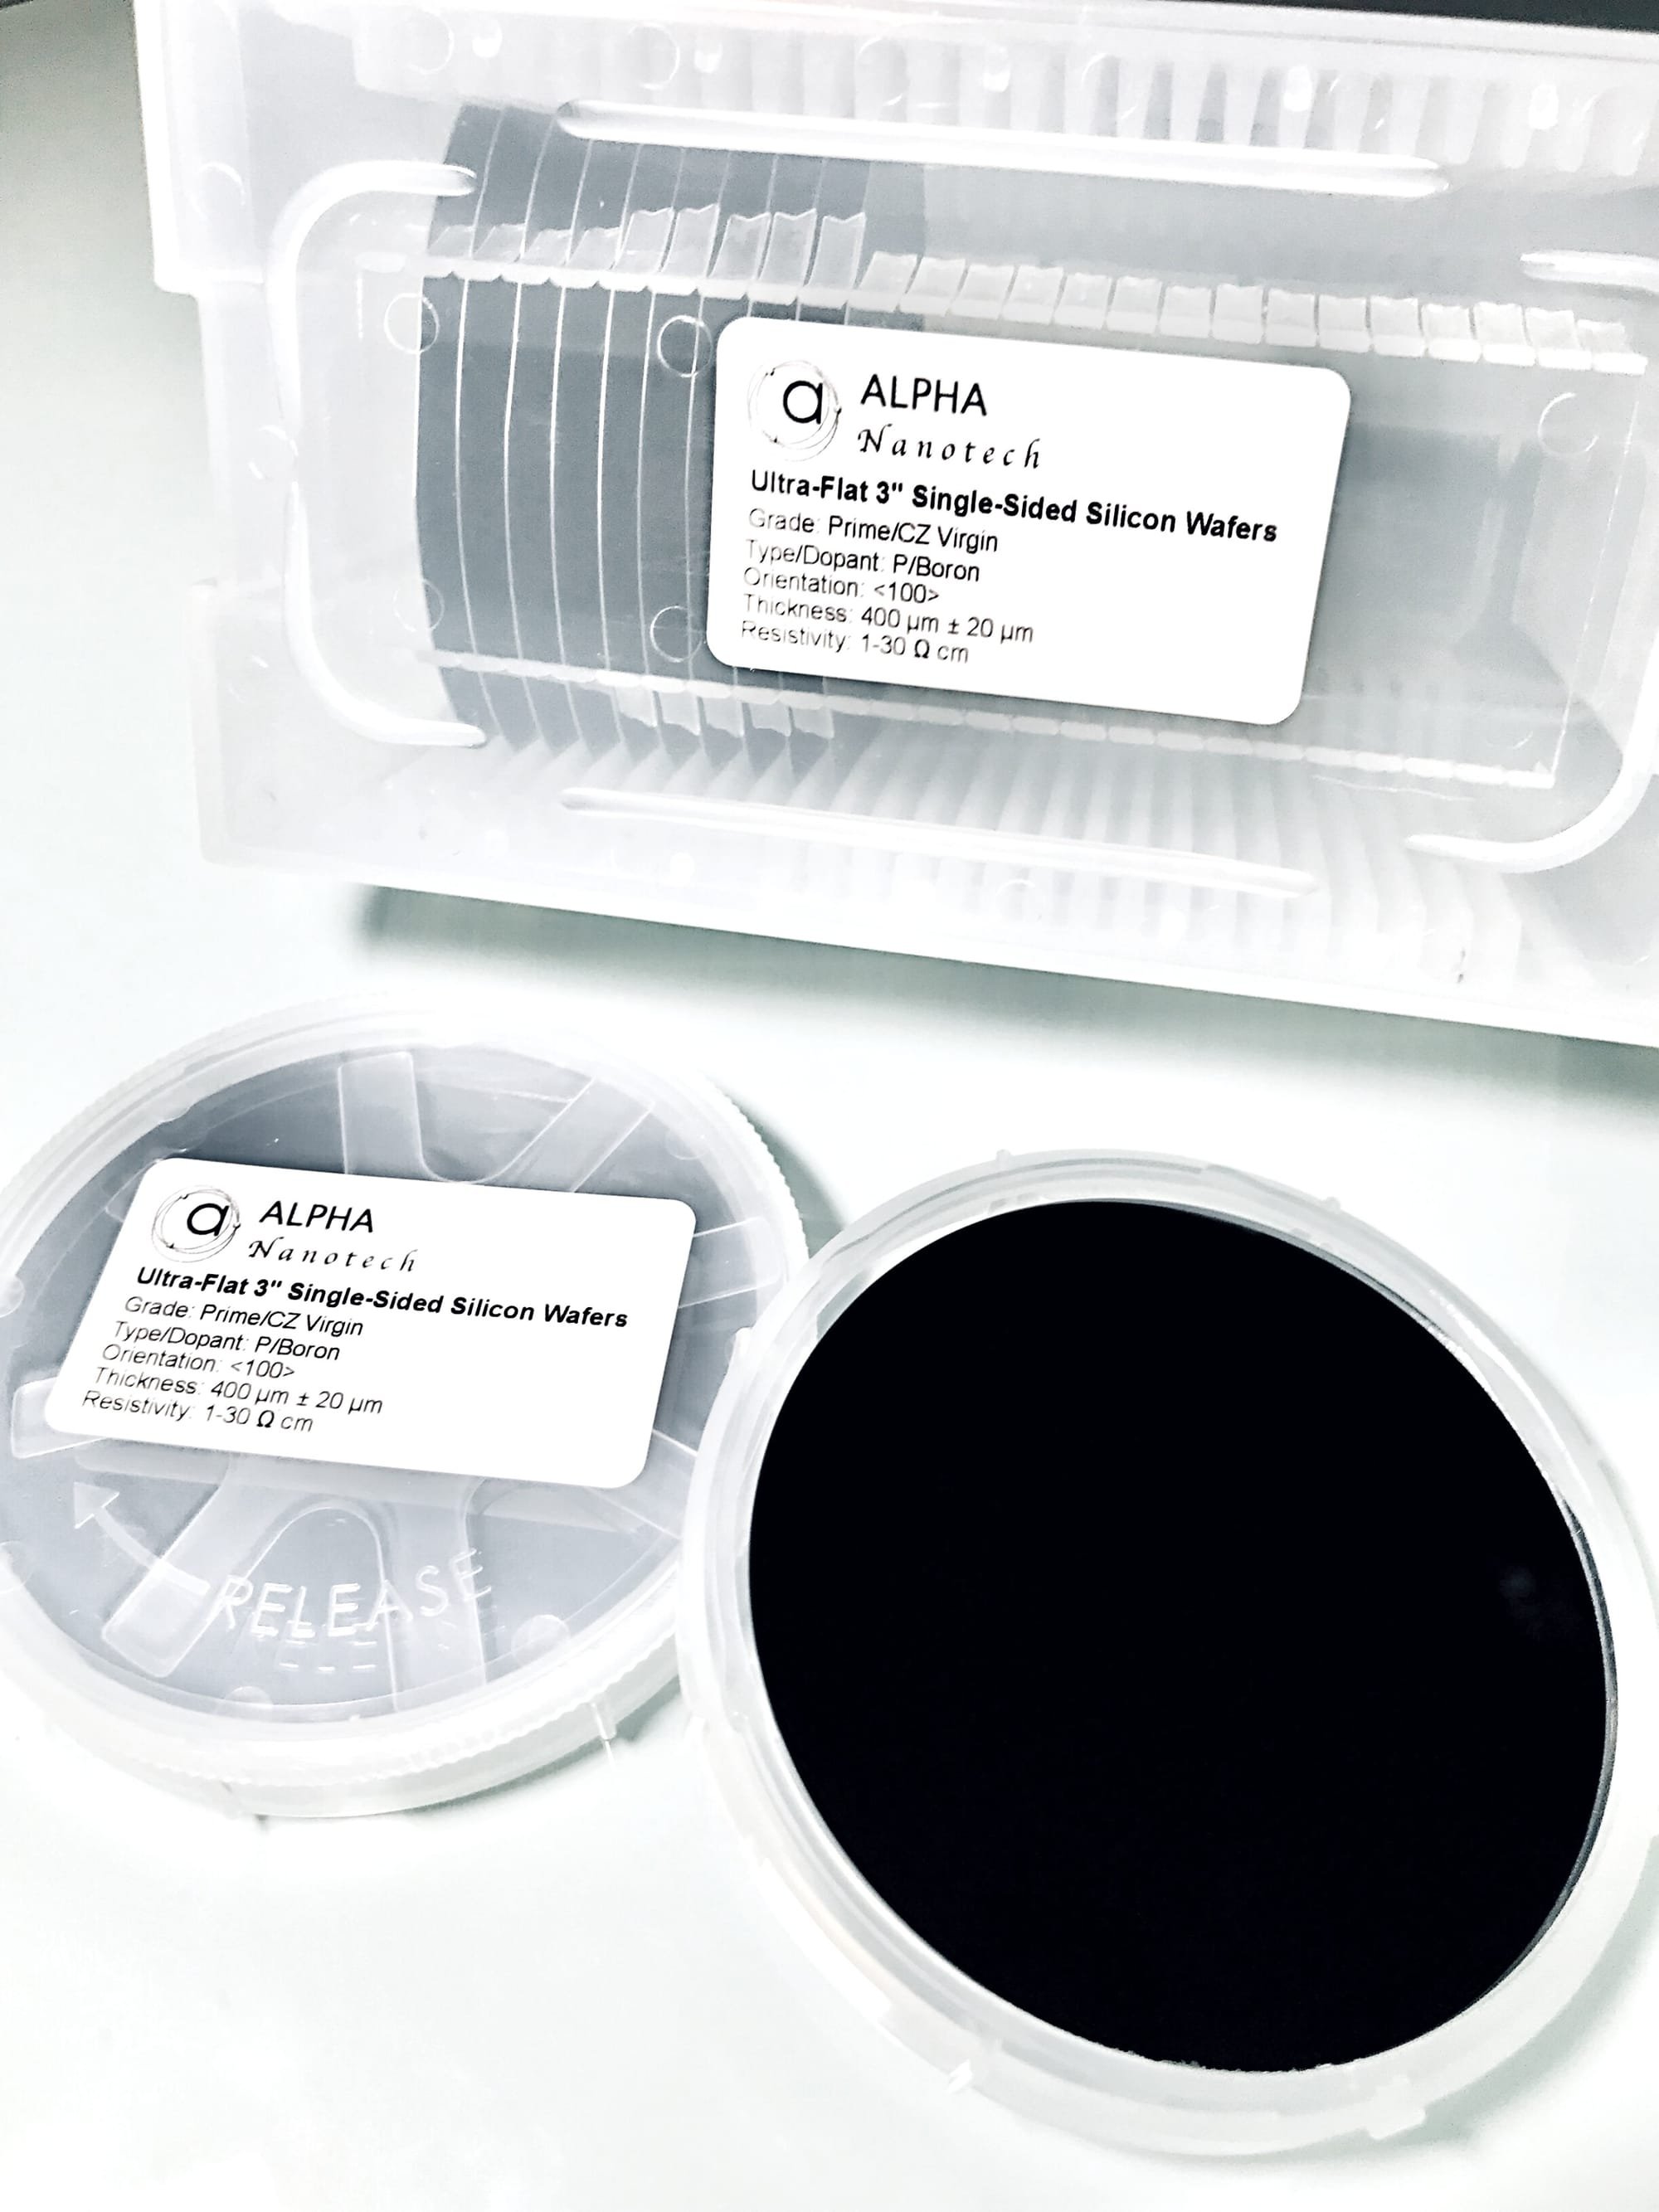 Prime-Grade 4 inch Silicon Wafer is Used to Make Integrated Circuits!